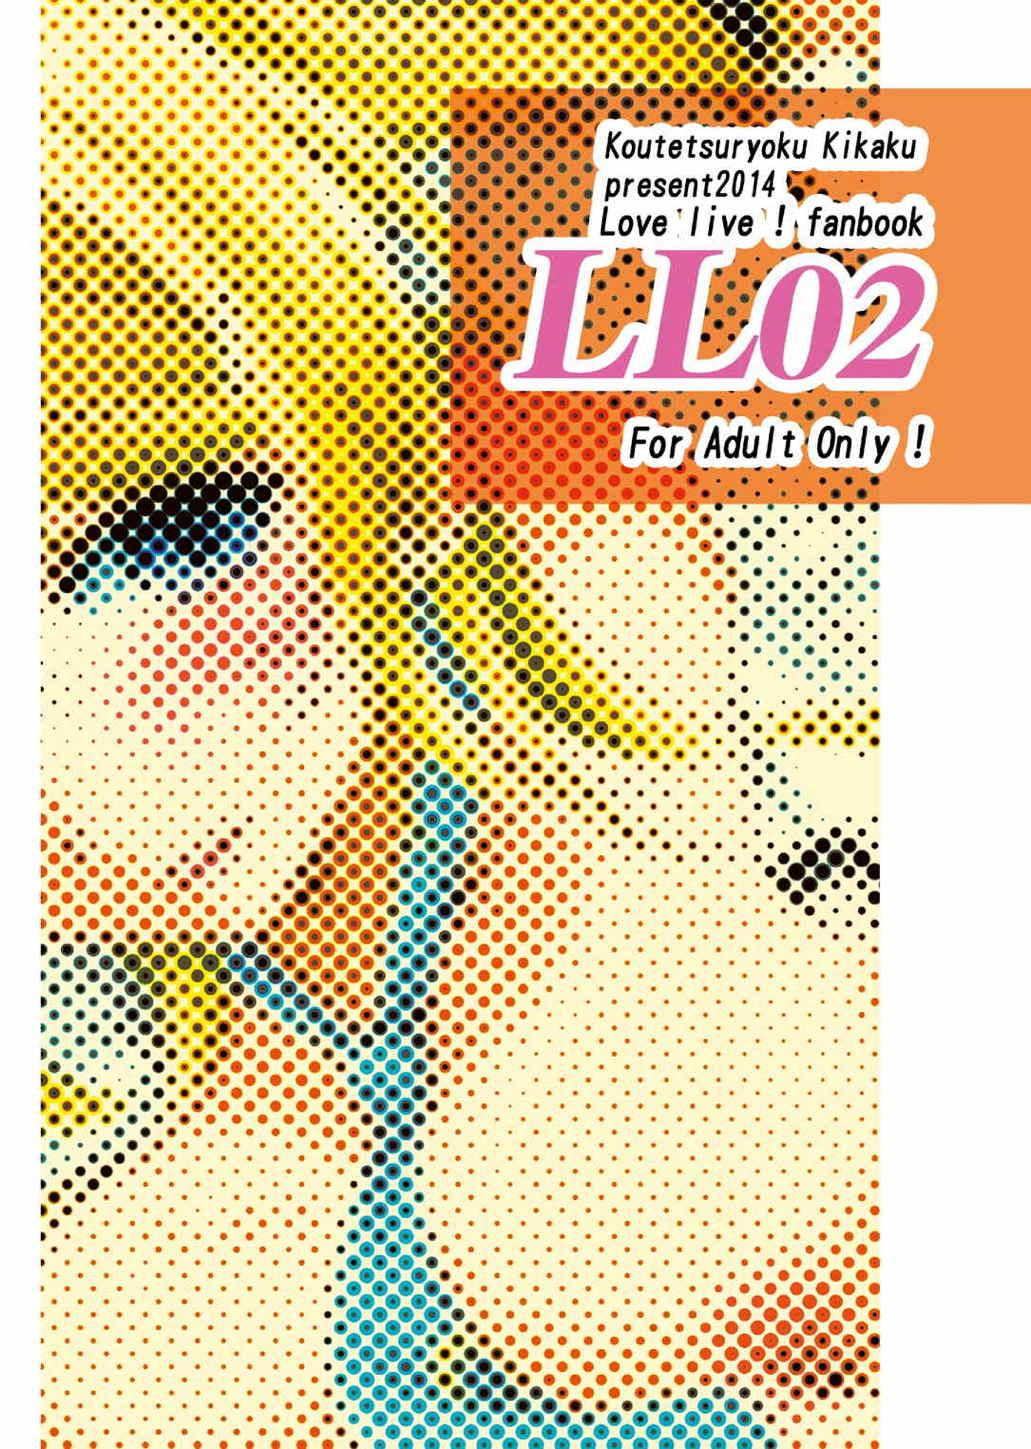 Nerd LL02 - Love live 4some - Page 18